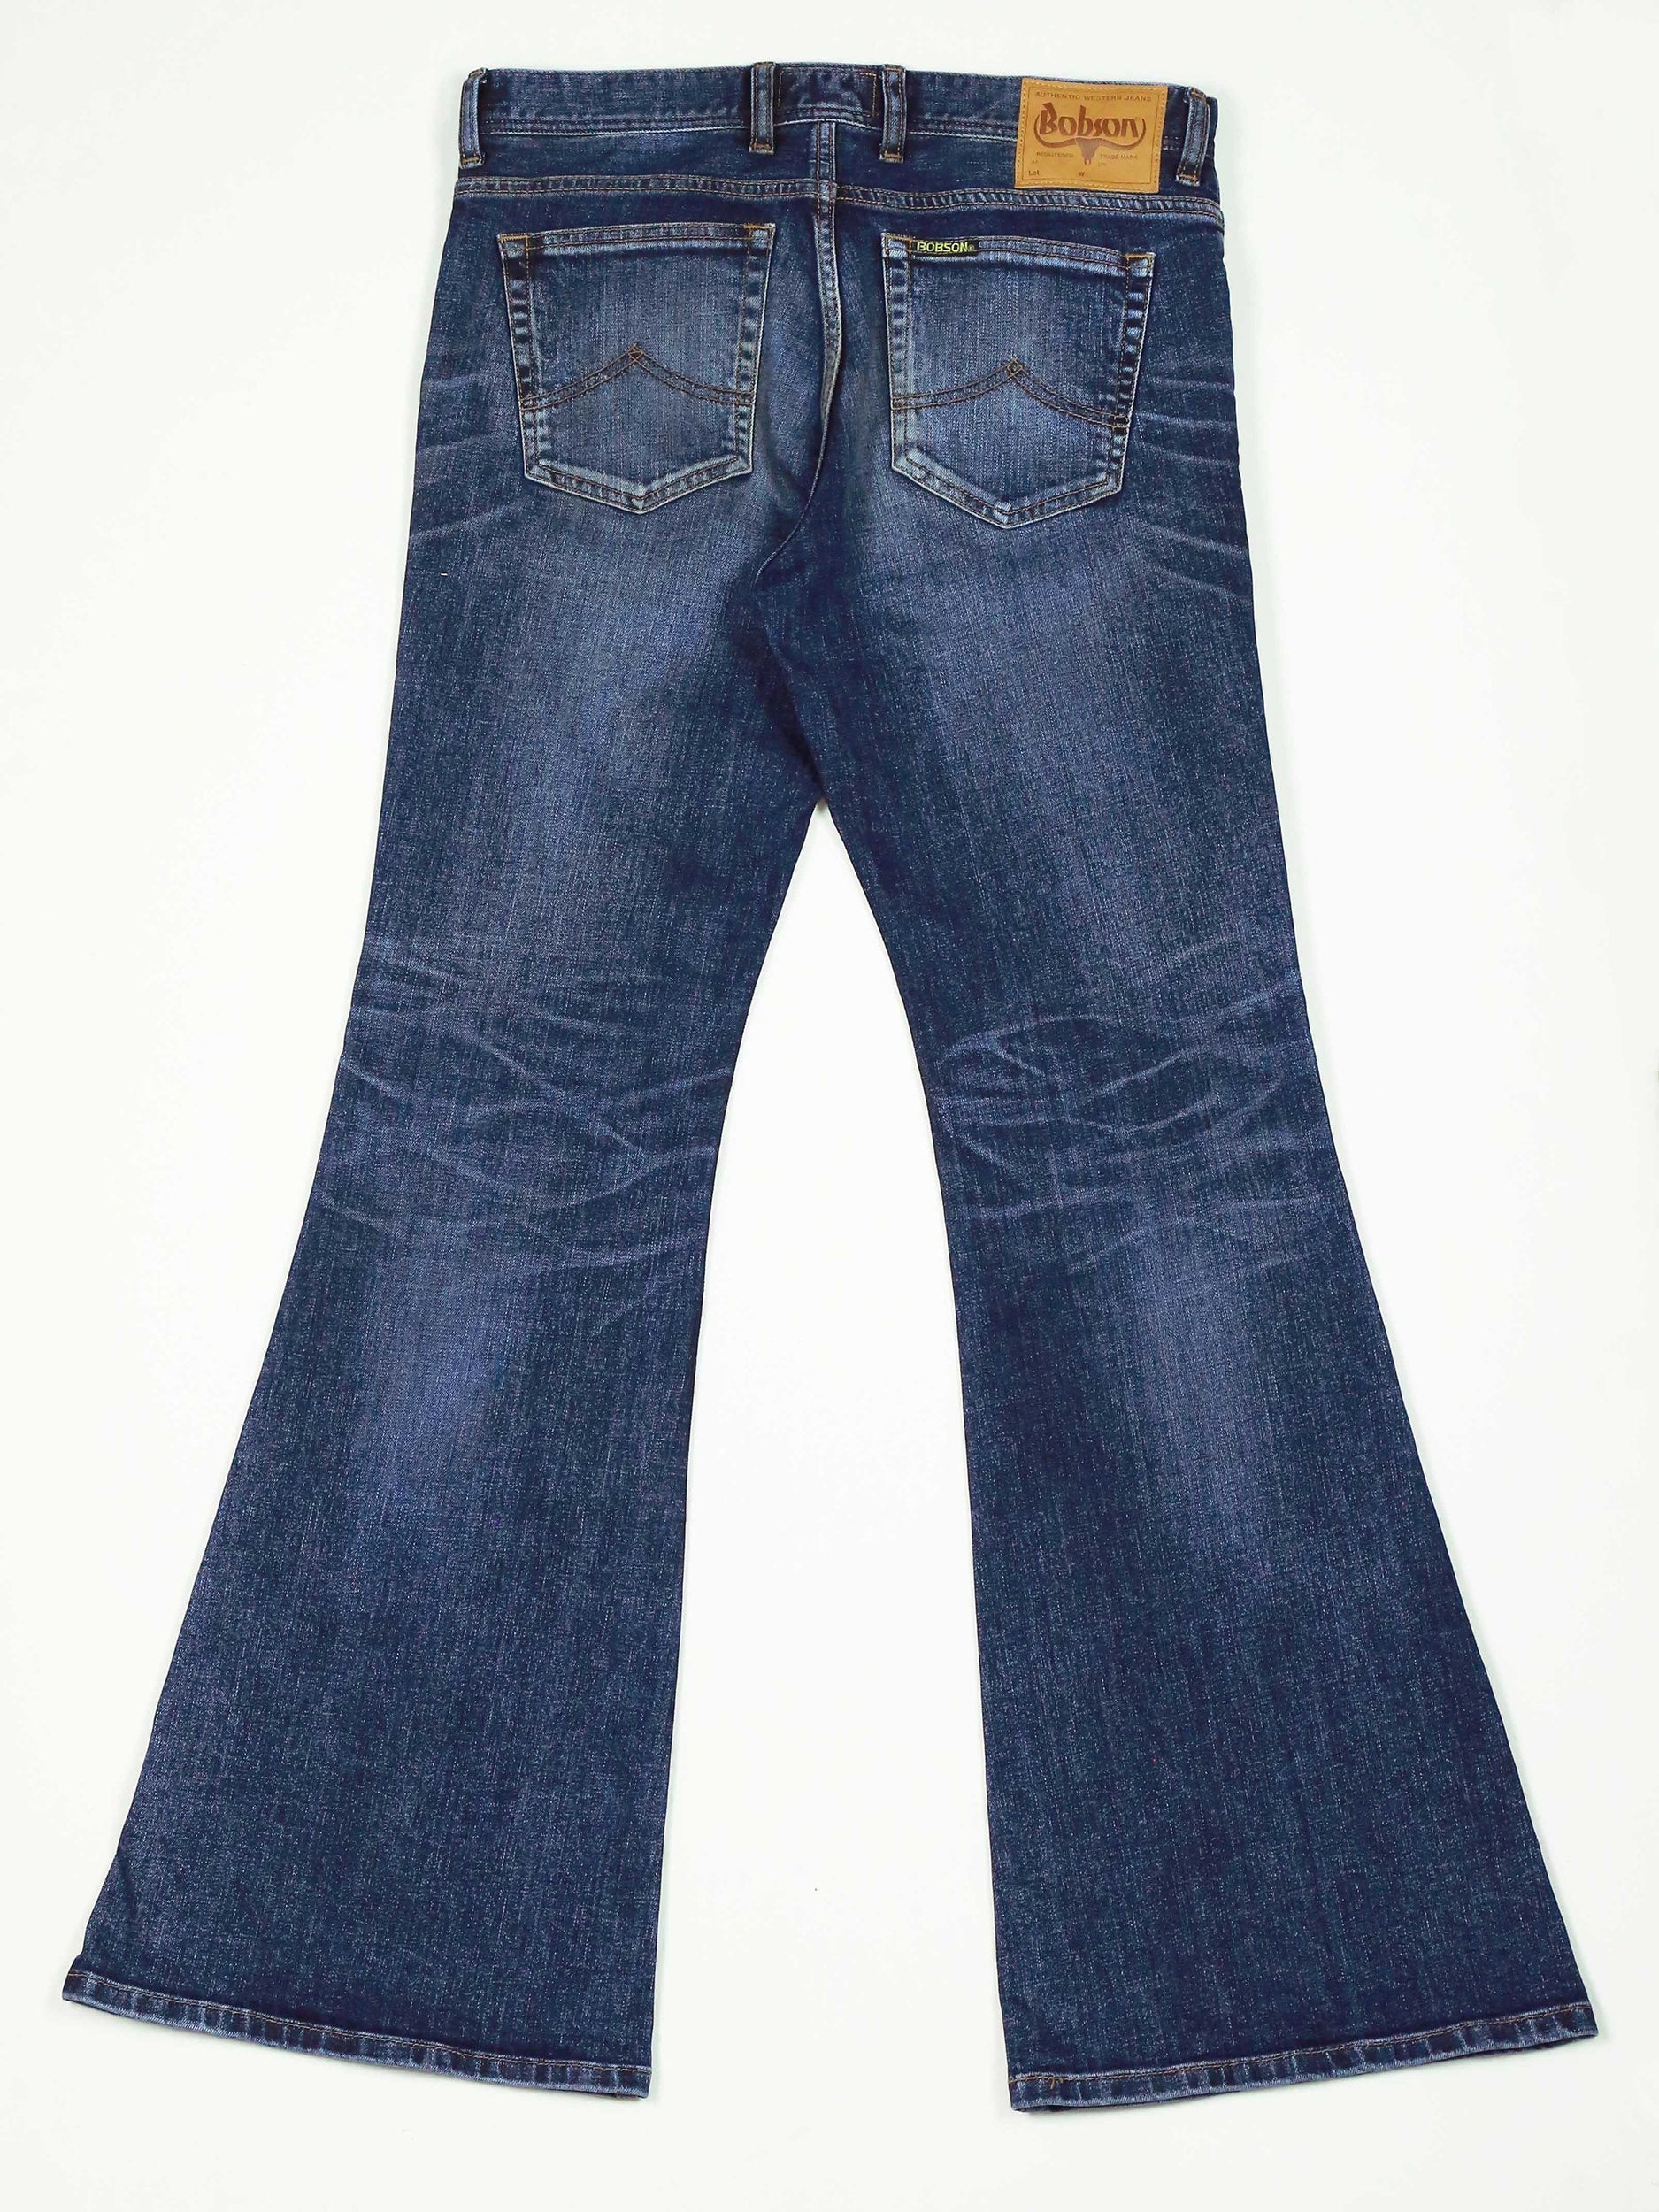 Bell Bottom Jeans Used Color/Unisex